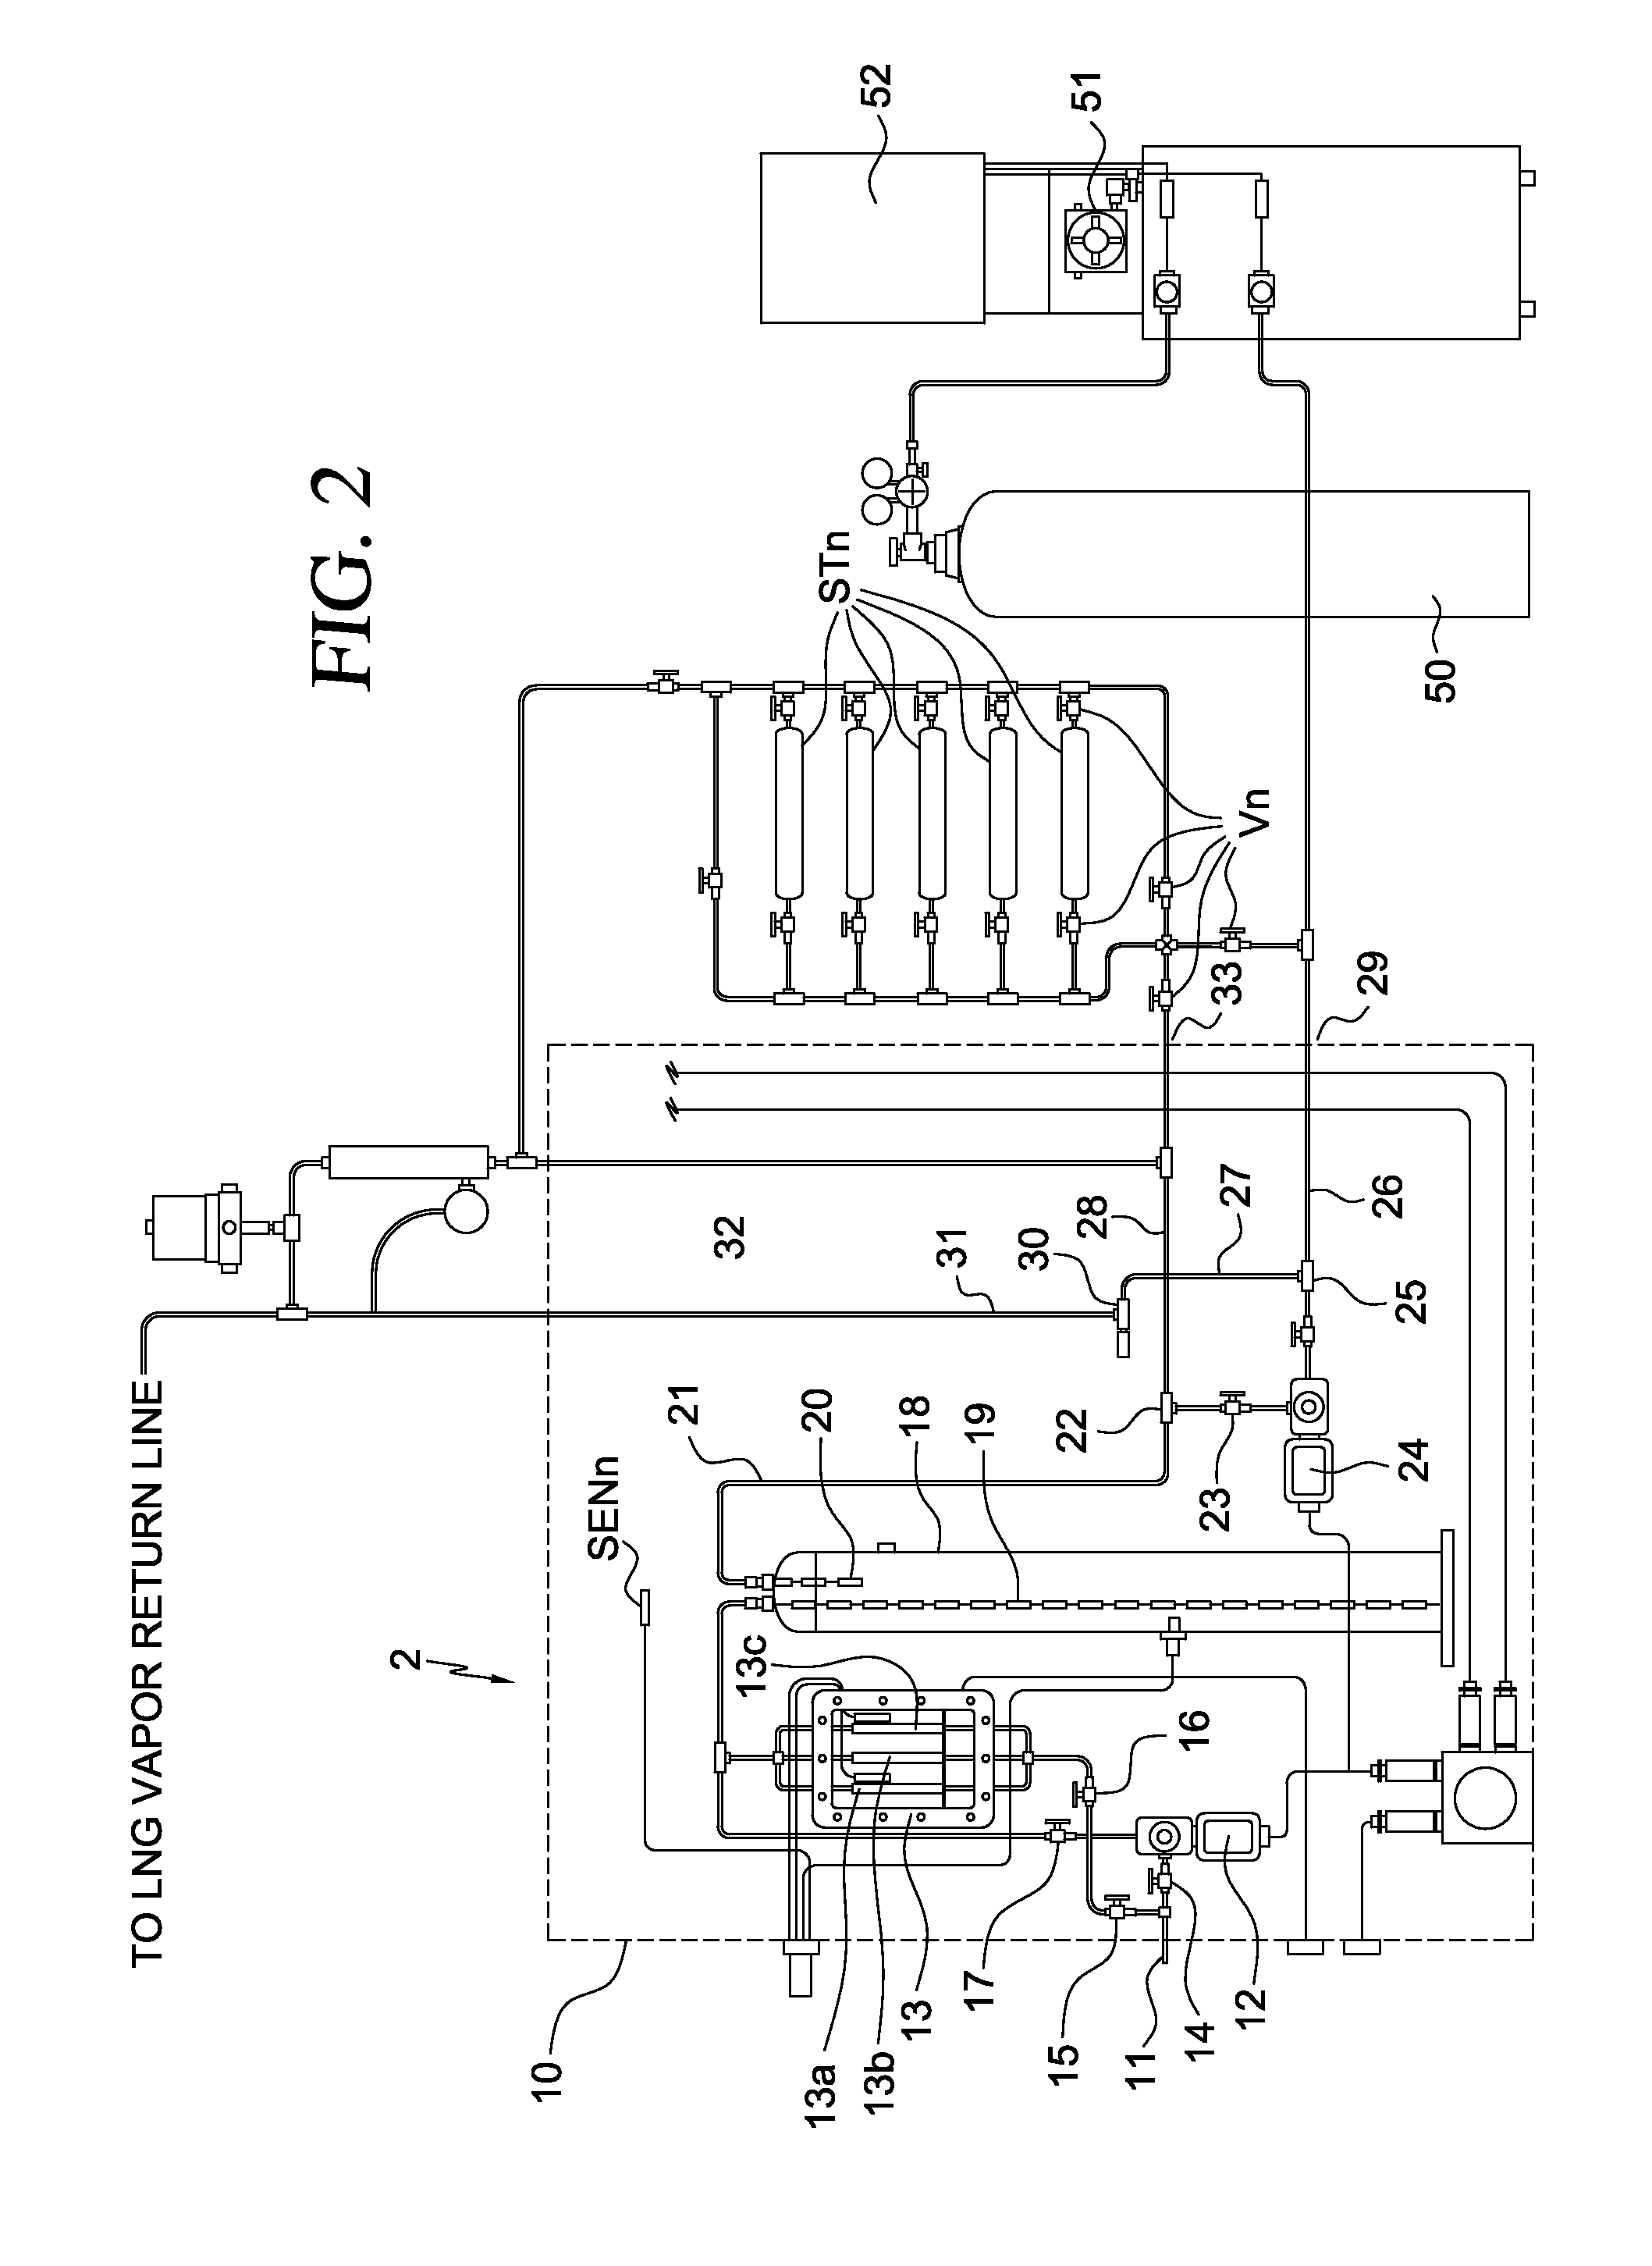 Liquid gas vaporization and measurement system and method